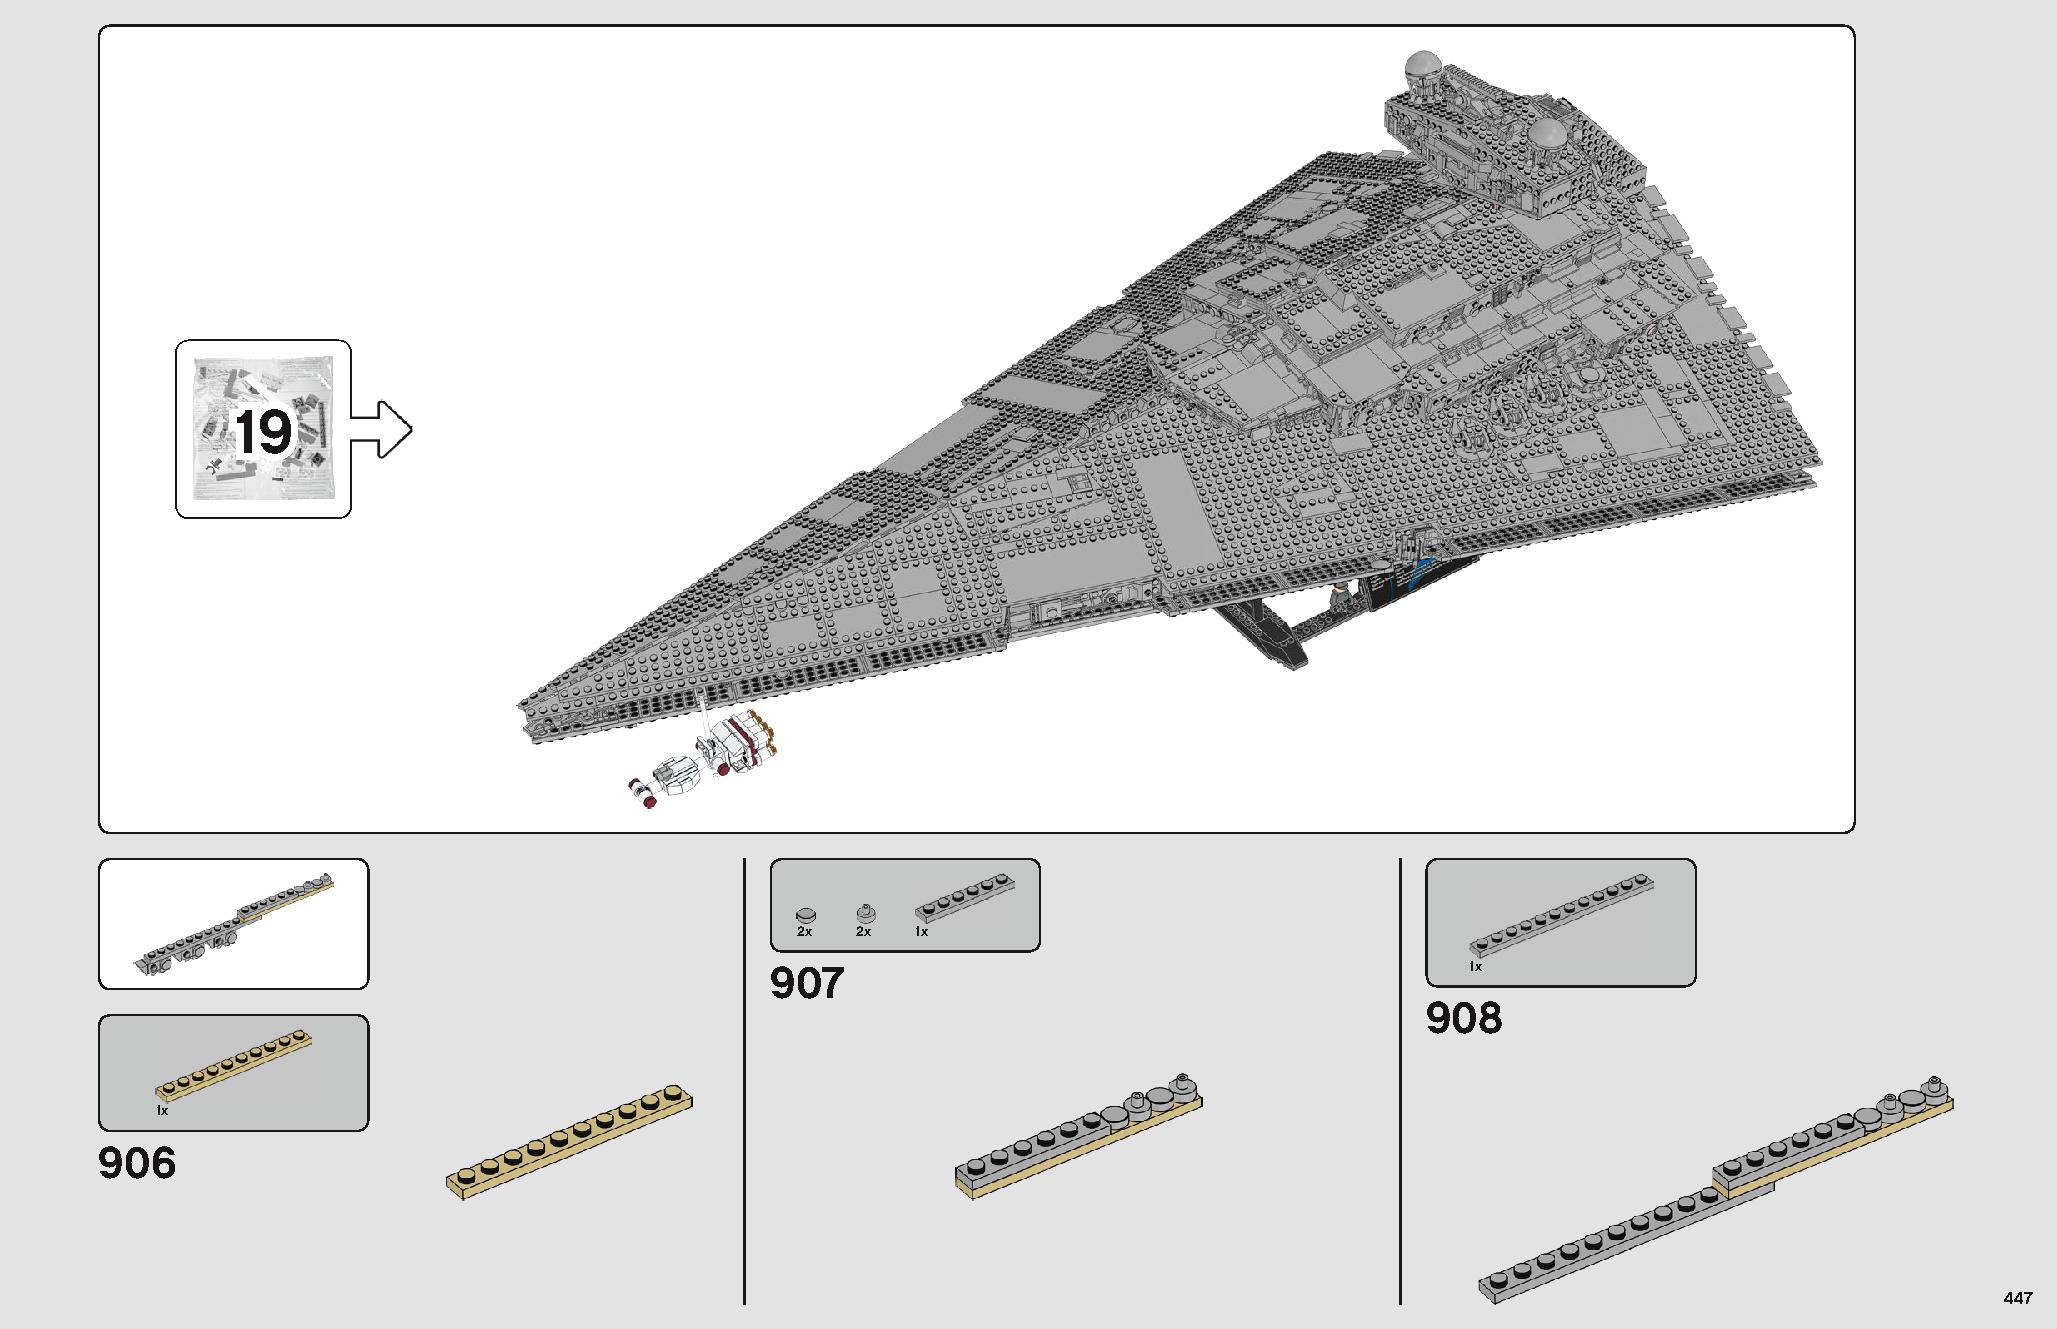 Imperial Star Destroyer 75252 LEGO information LEGO instructions 447 page